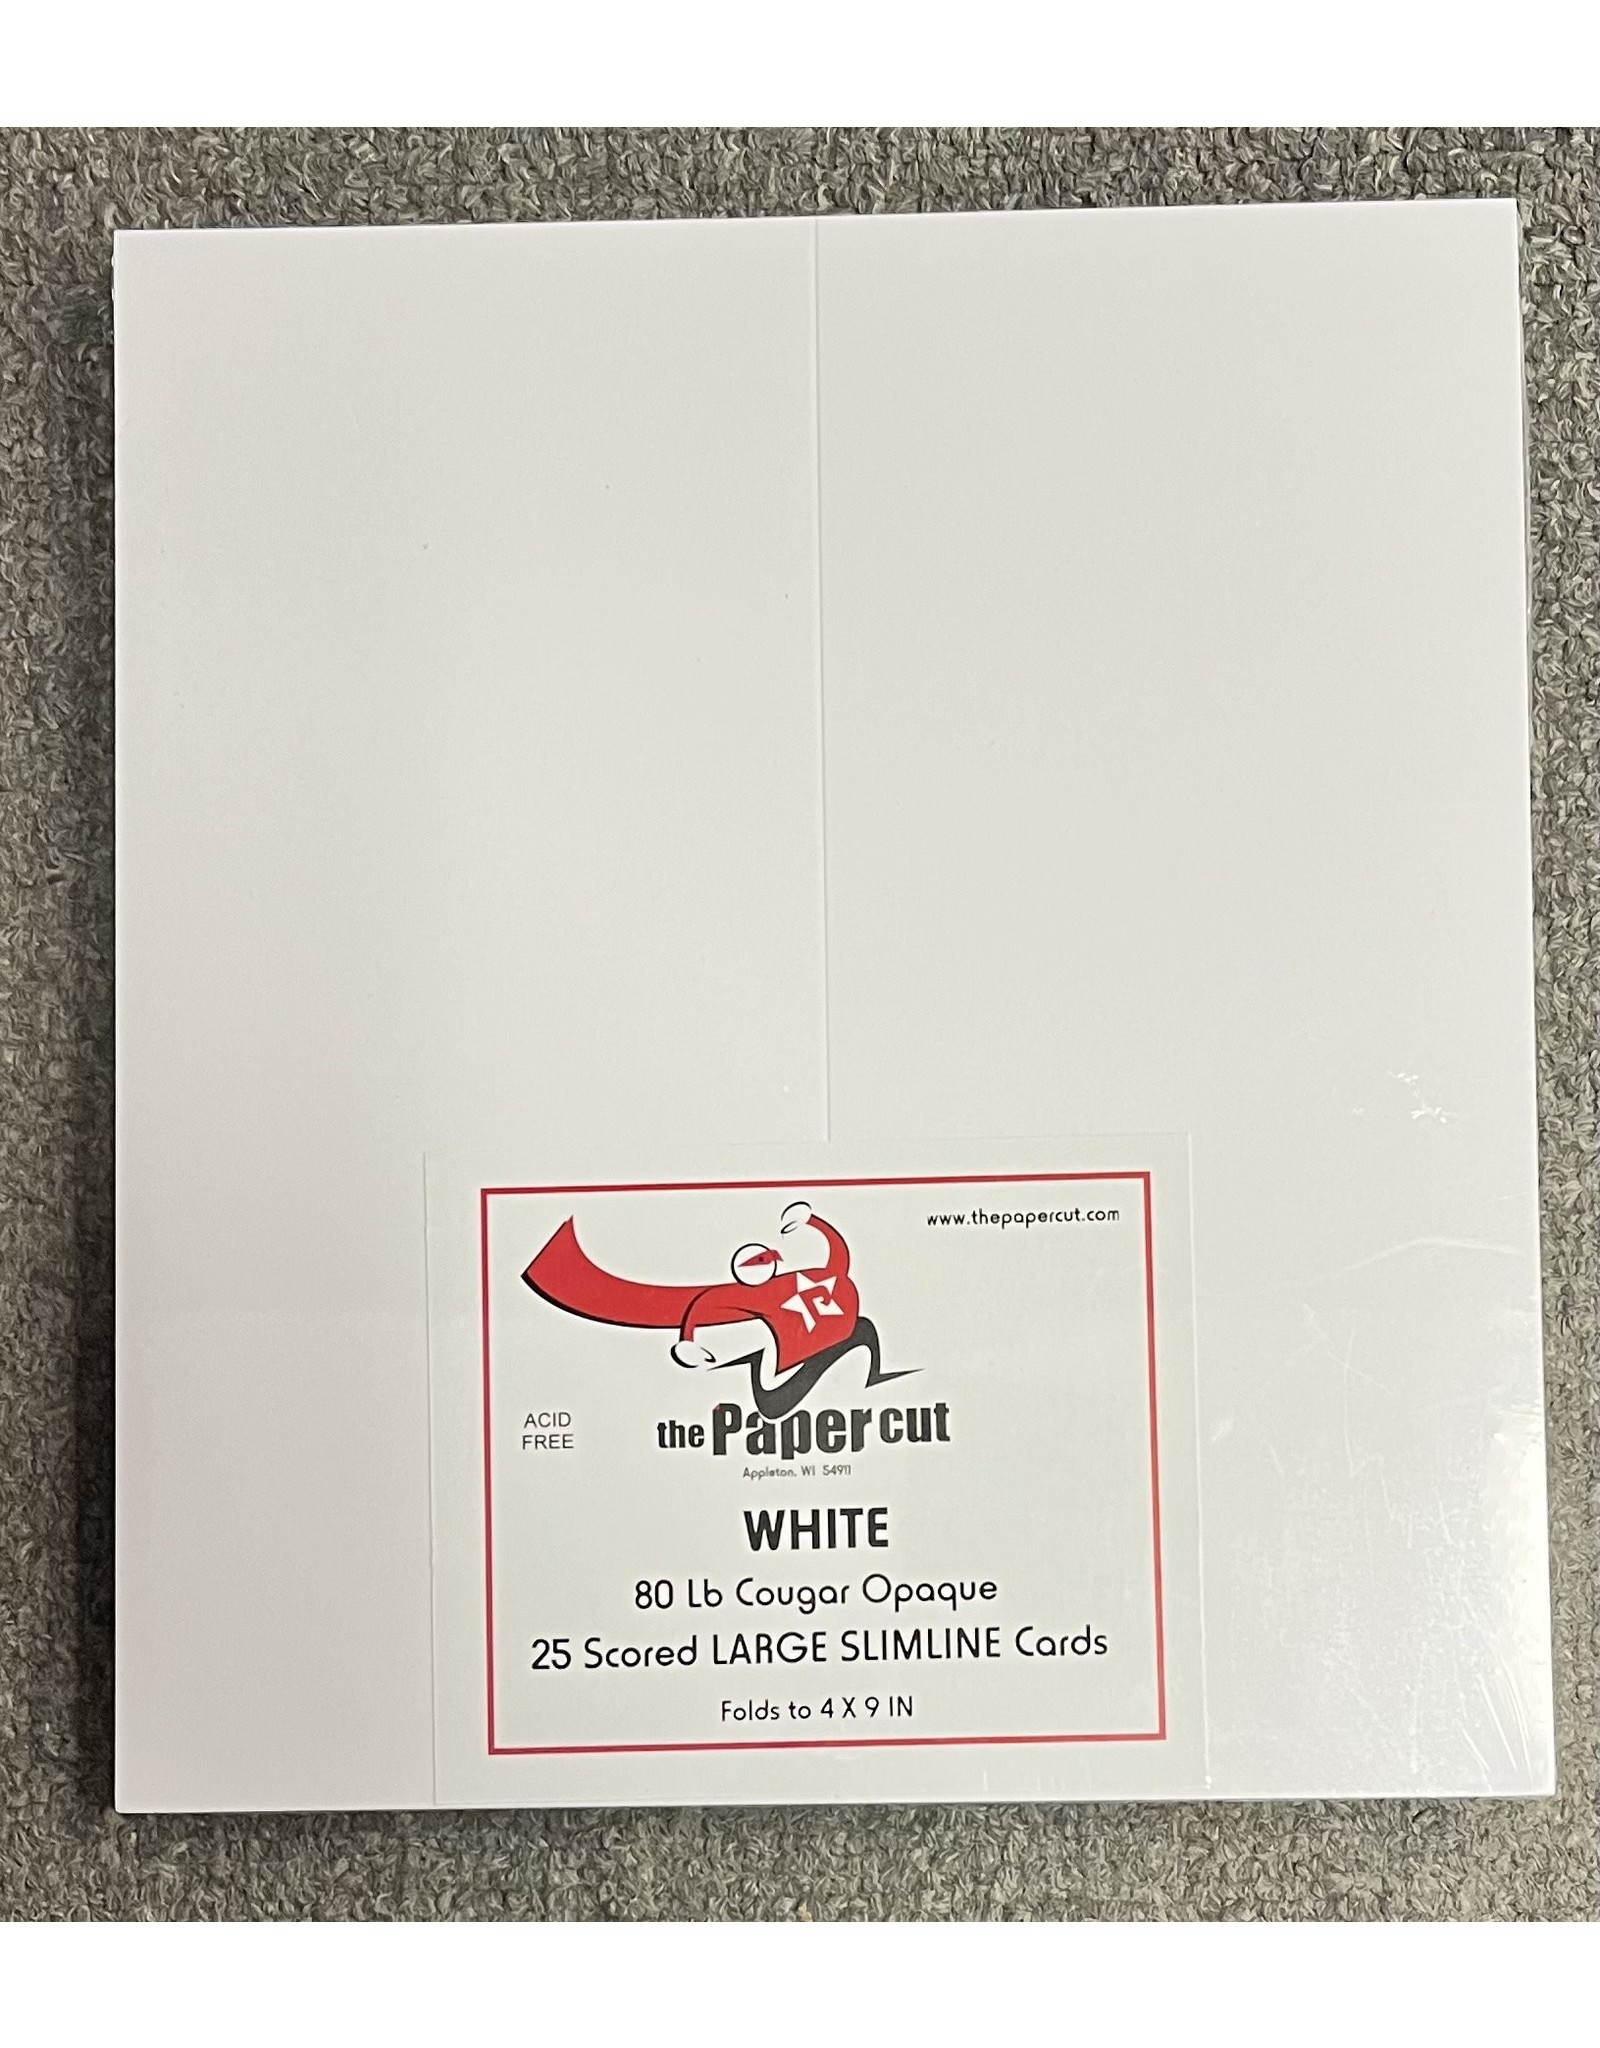 PAPER CUT THE PAPER CUT SCORED LARGE SLIMLINE CARDS WHITE 4x9 FOLDED 25 PACK